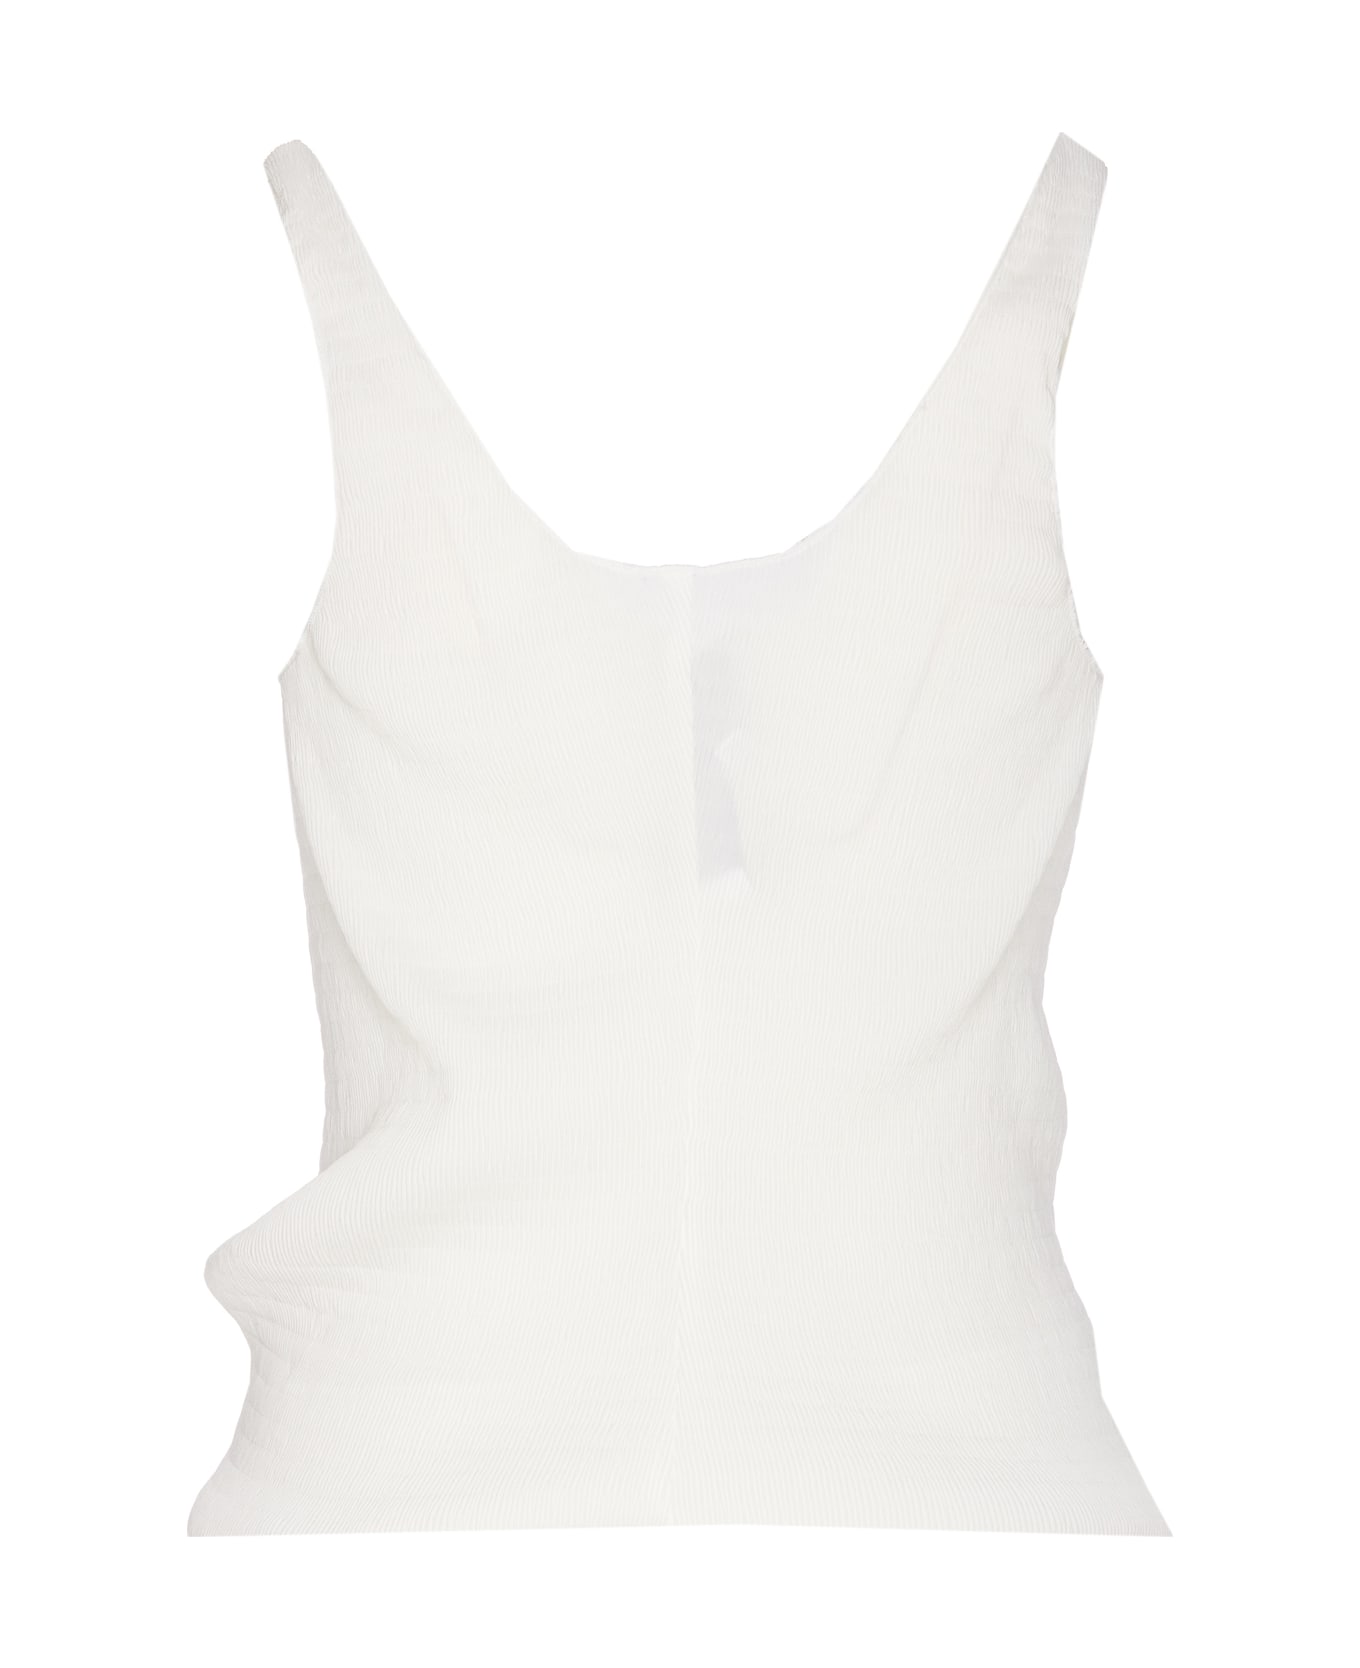 J.W. Anderson Knot Front Strap Top - White トップス